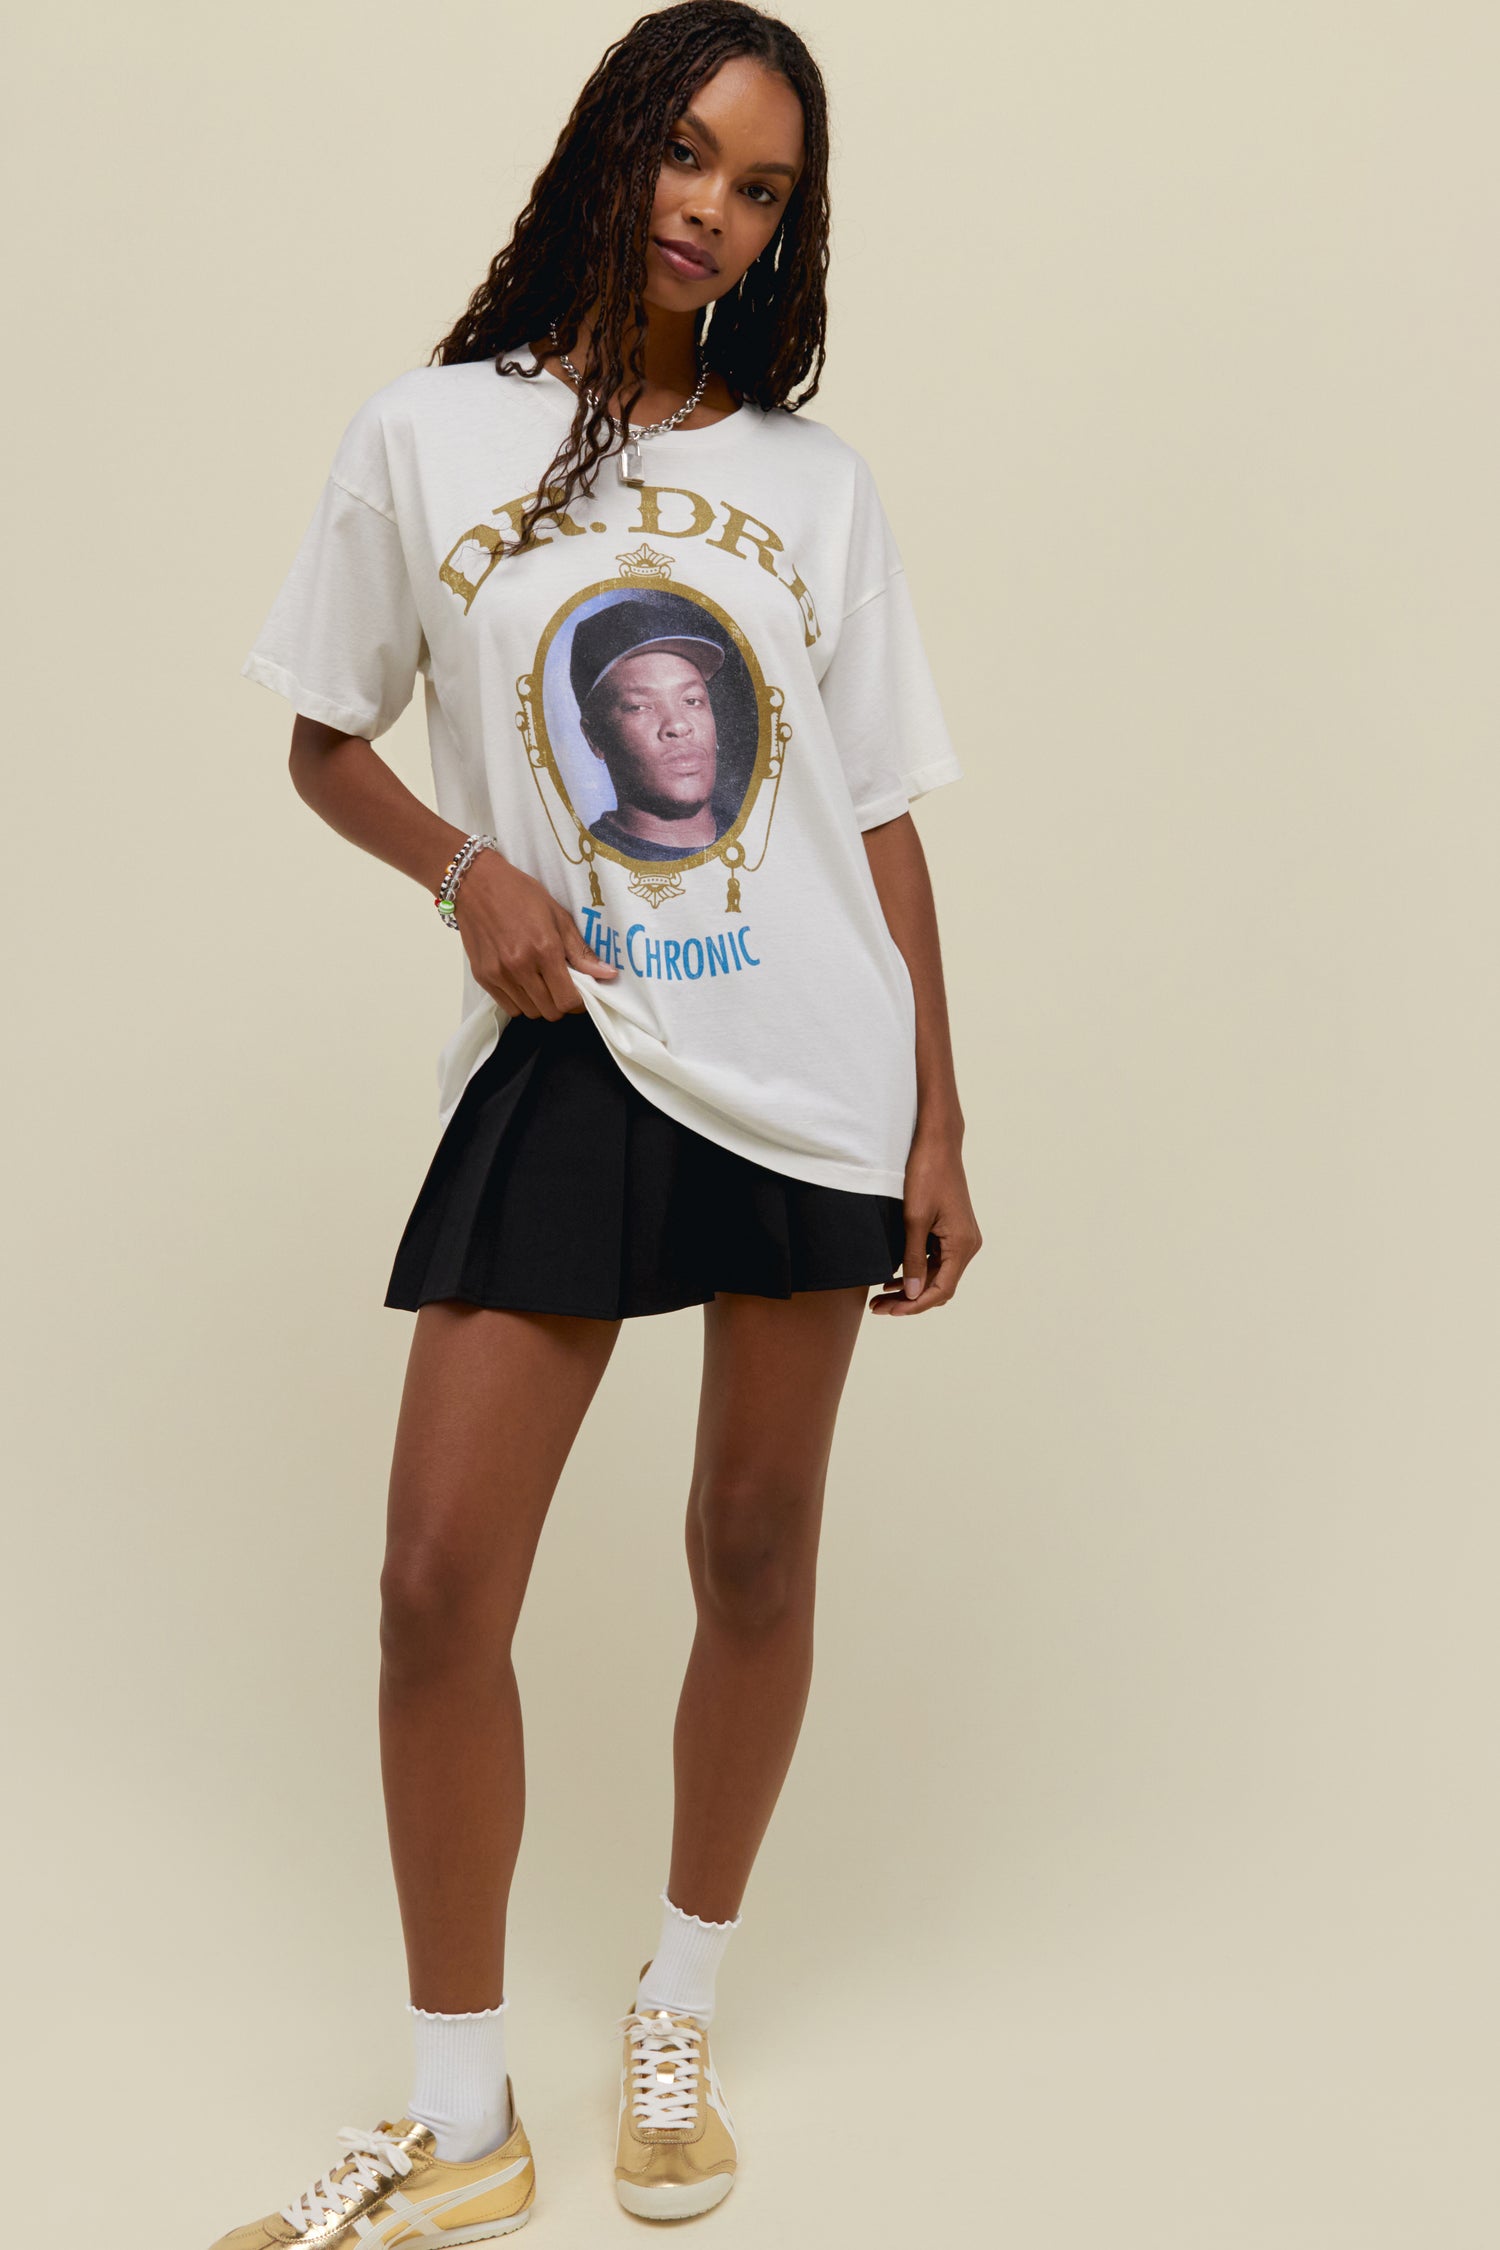 A dark-haired model featuring a white tee designed with the album's cover artwork accented in gold ink and featuring a portrait of the legend.